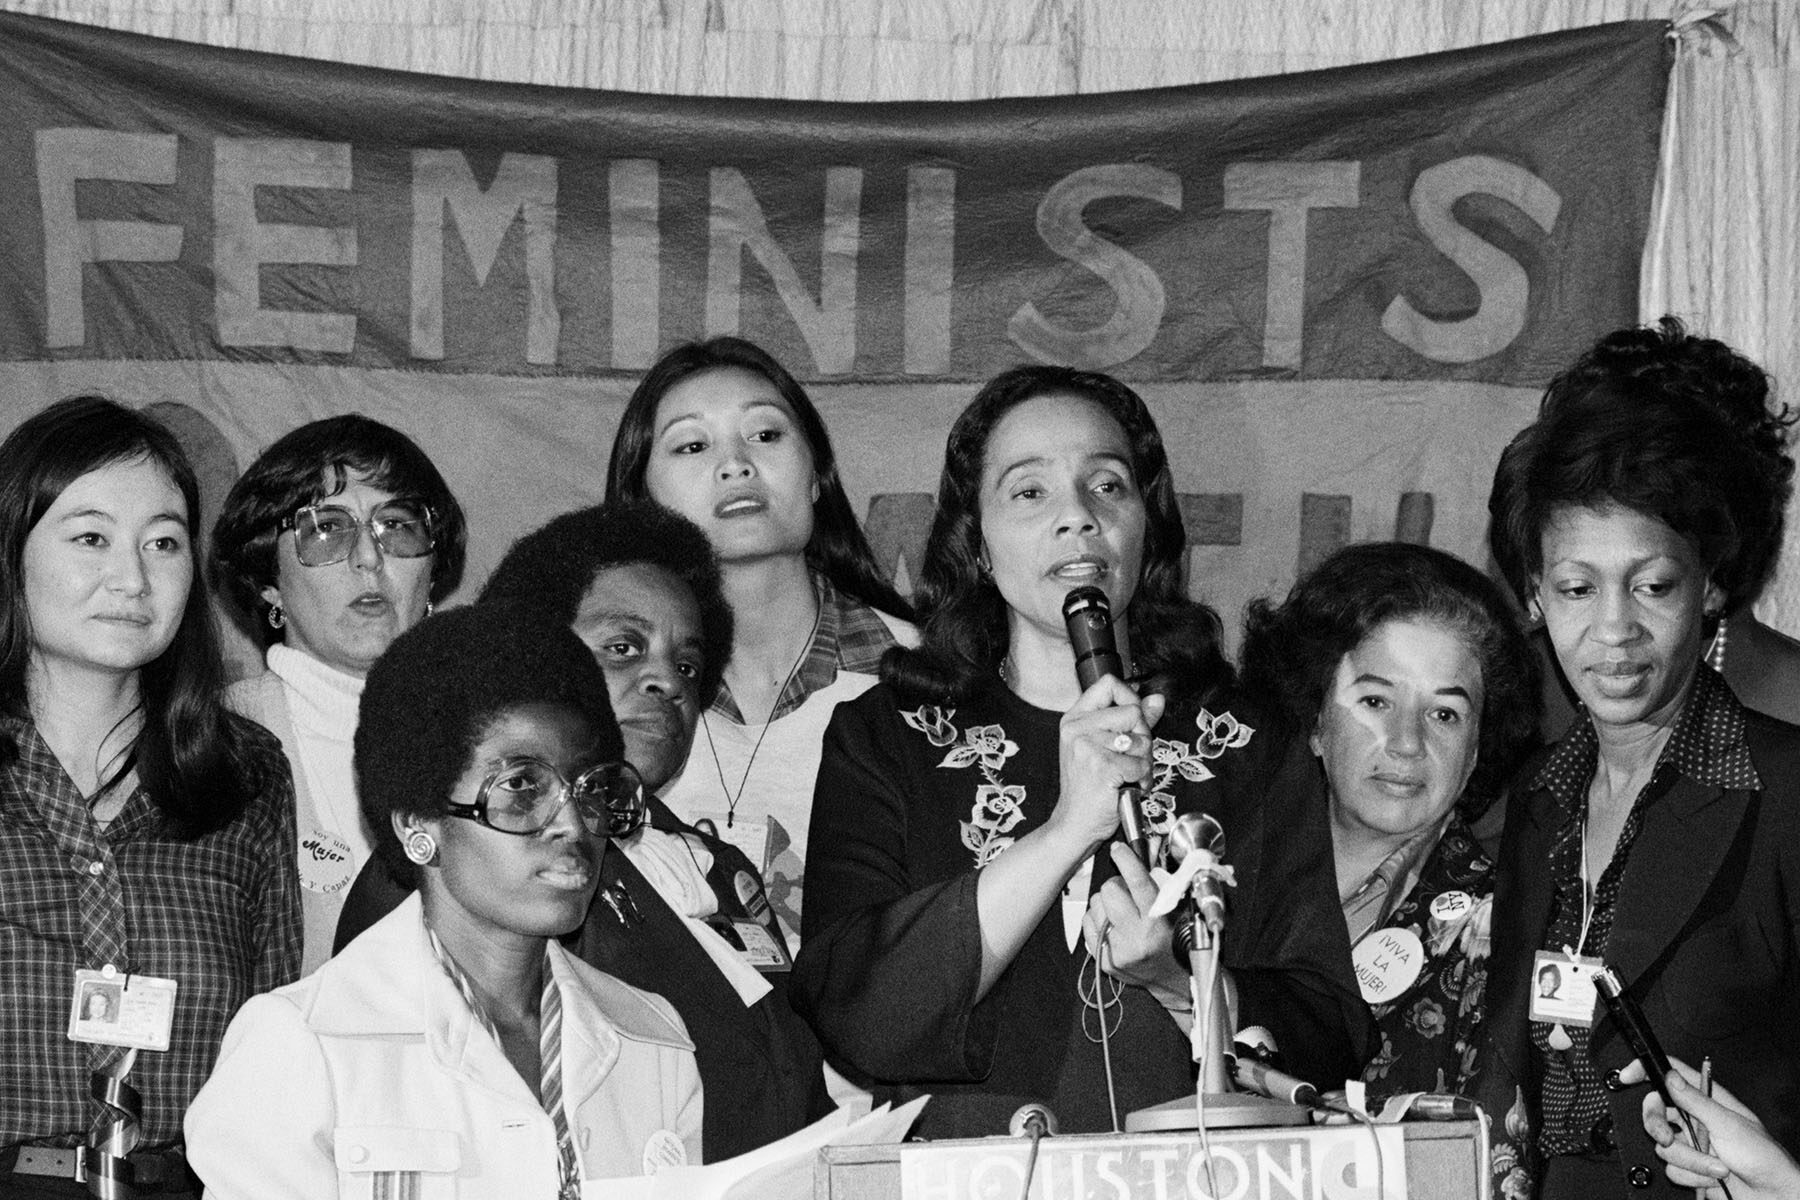 Surrounded by women, Coretta Scott King speaks at a podium during the National Women's Conference